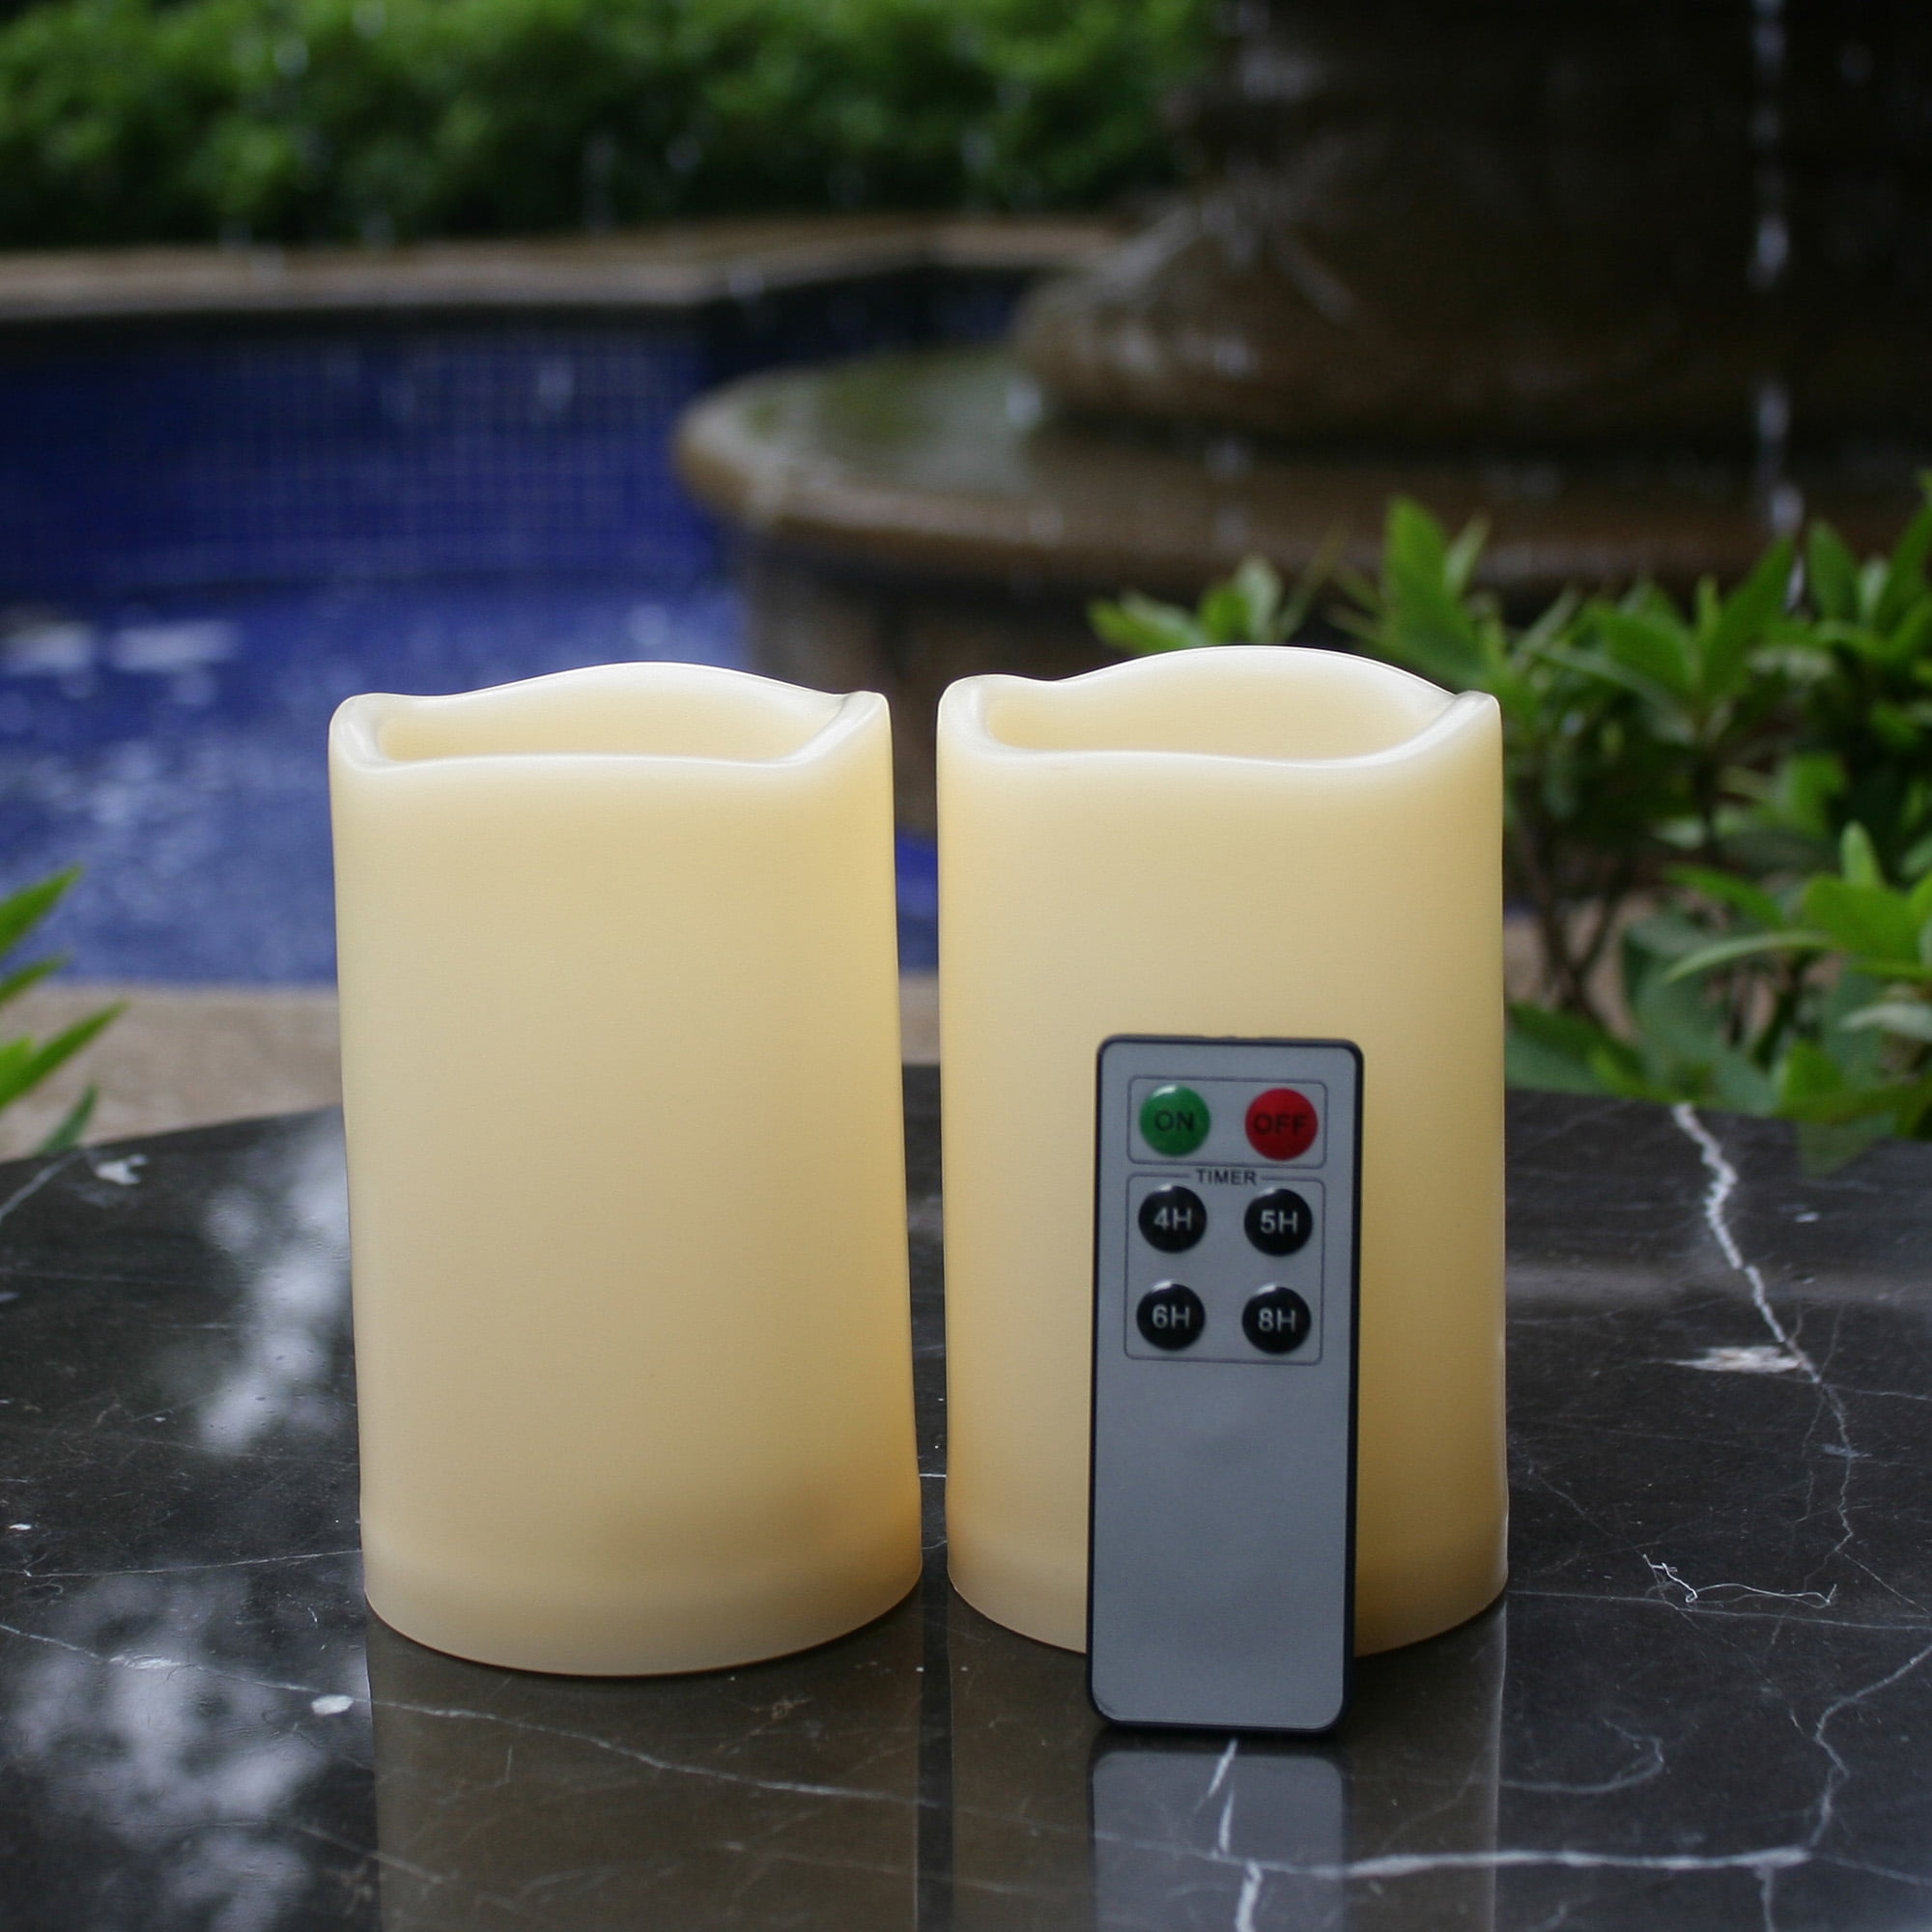 2 Waterproof Outdoor Battery Operated Flameless LED Pillar Candles with Timer Flickering Plastic Resin Electric Decorative Light for Lantern Patio Garden Home Decor Party Wedding Decorations 3x4 Inch 